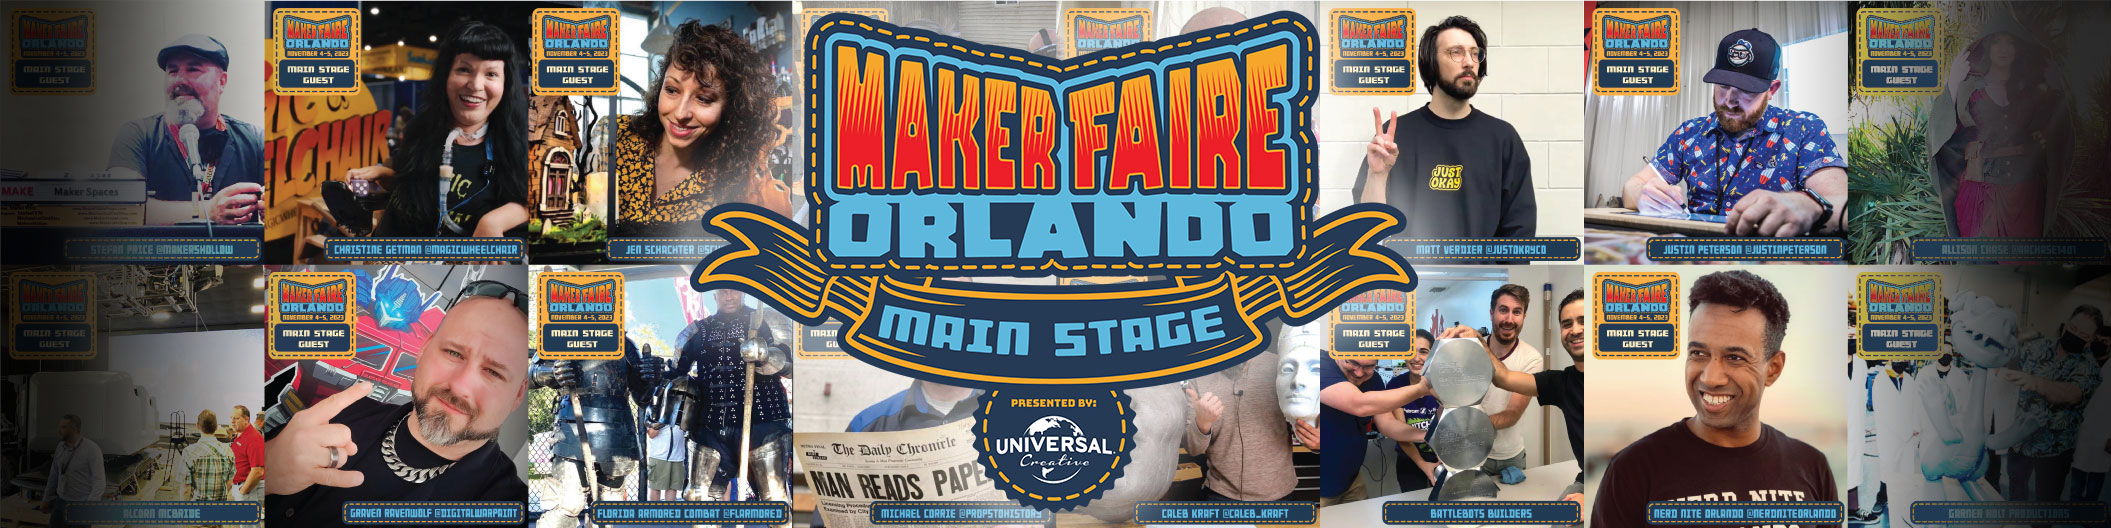 Check out the Featured Guests, Panels & Talks at Maker Faire Orlando!